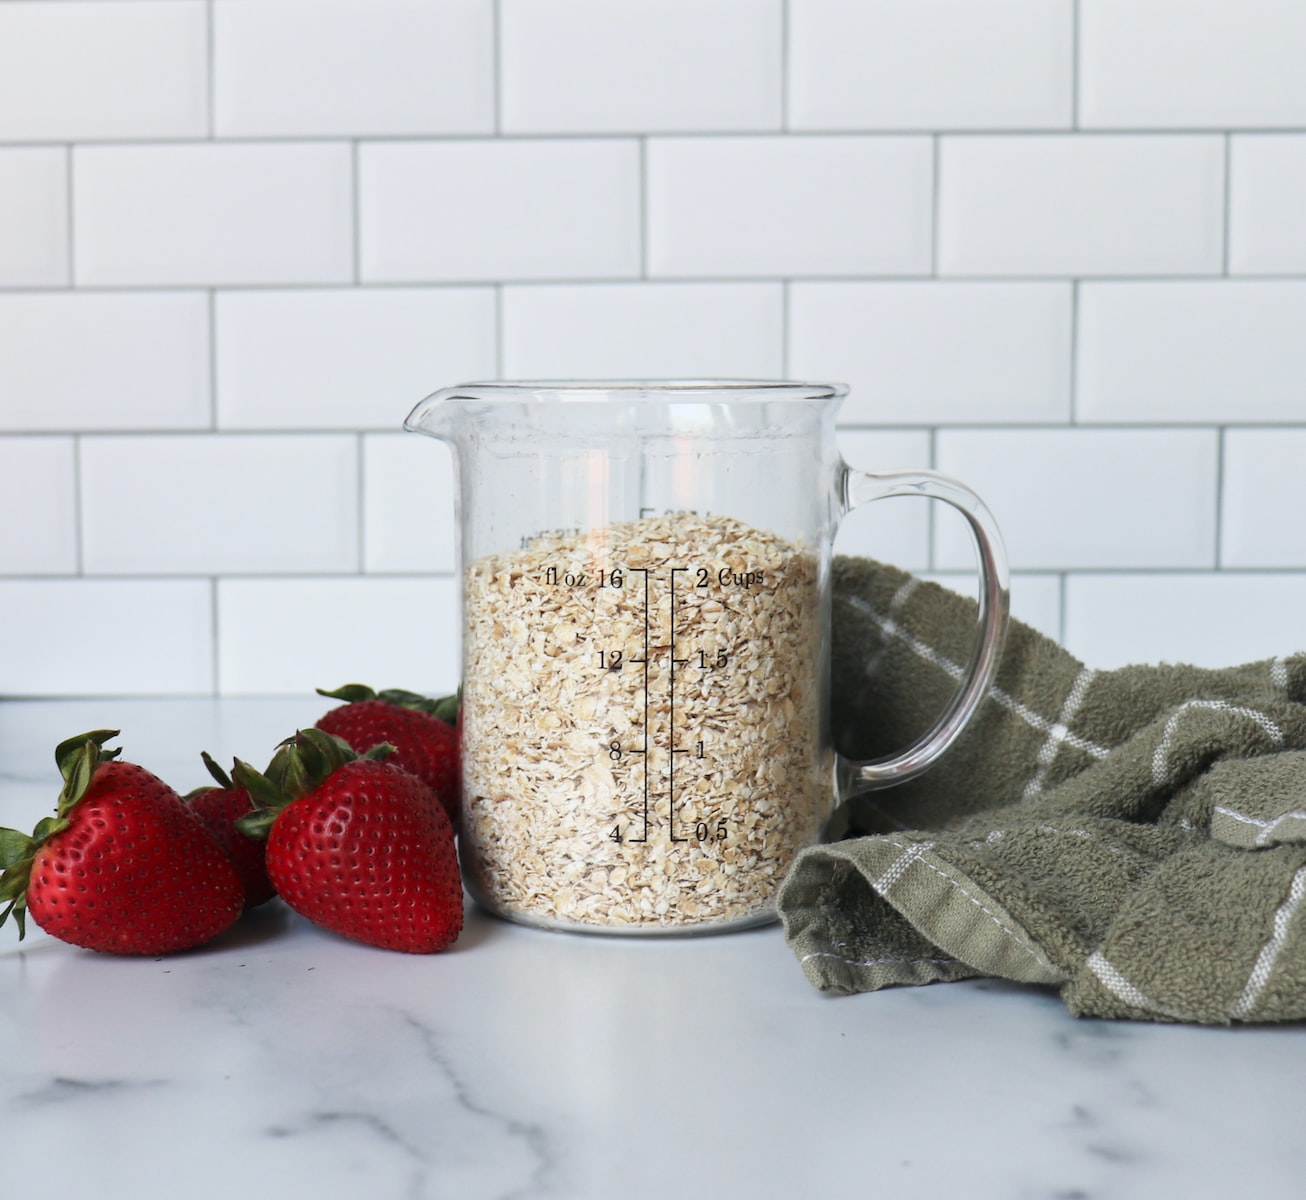 strawberries on white ceramic bowl beside clear glass of oatmeal